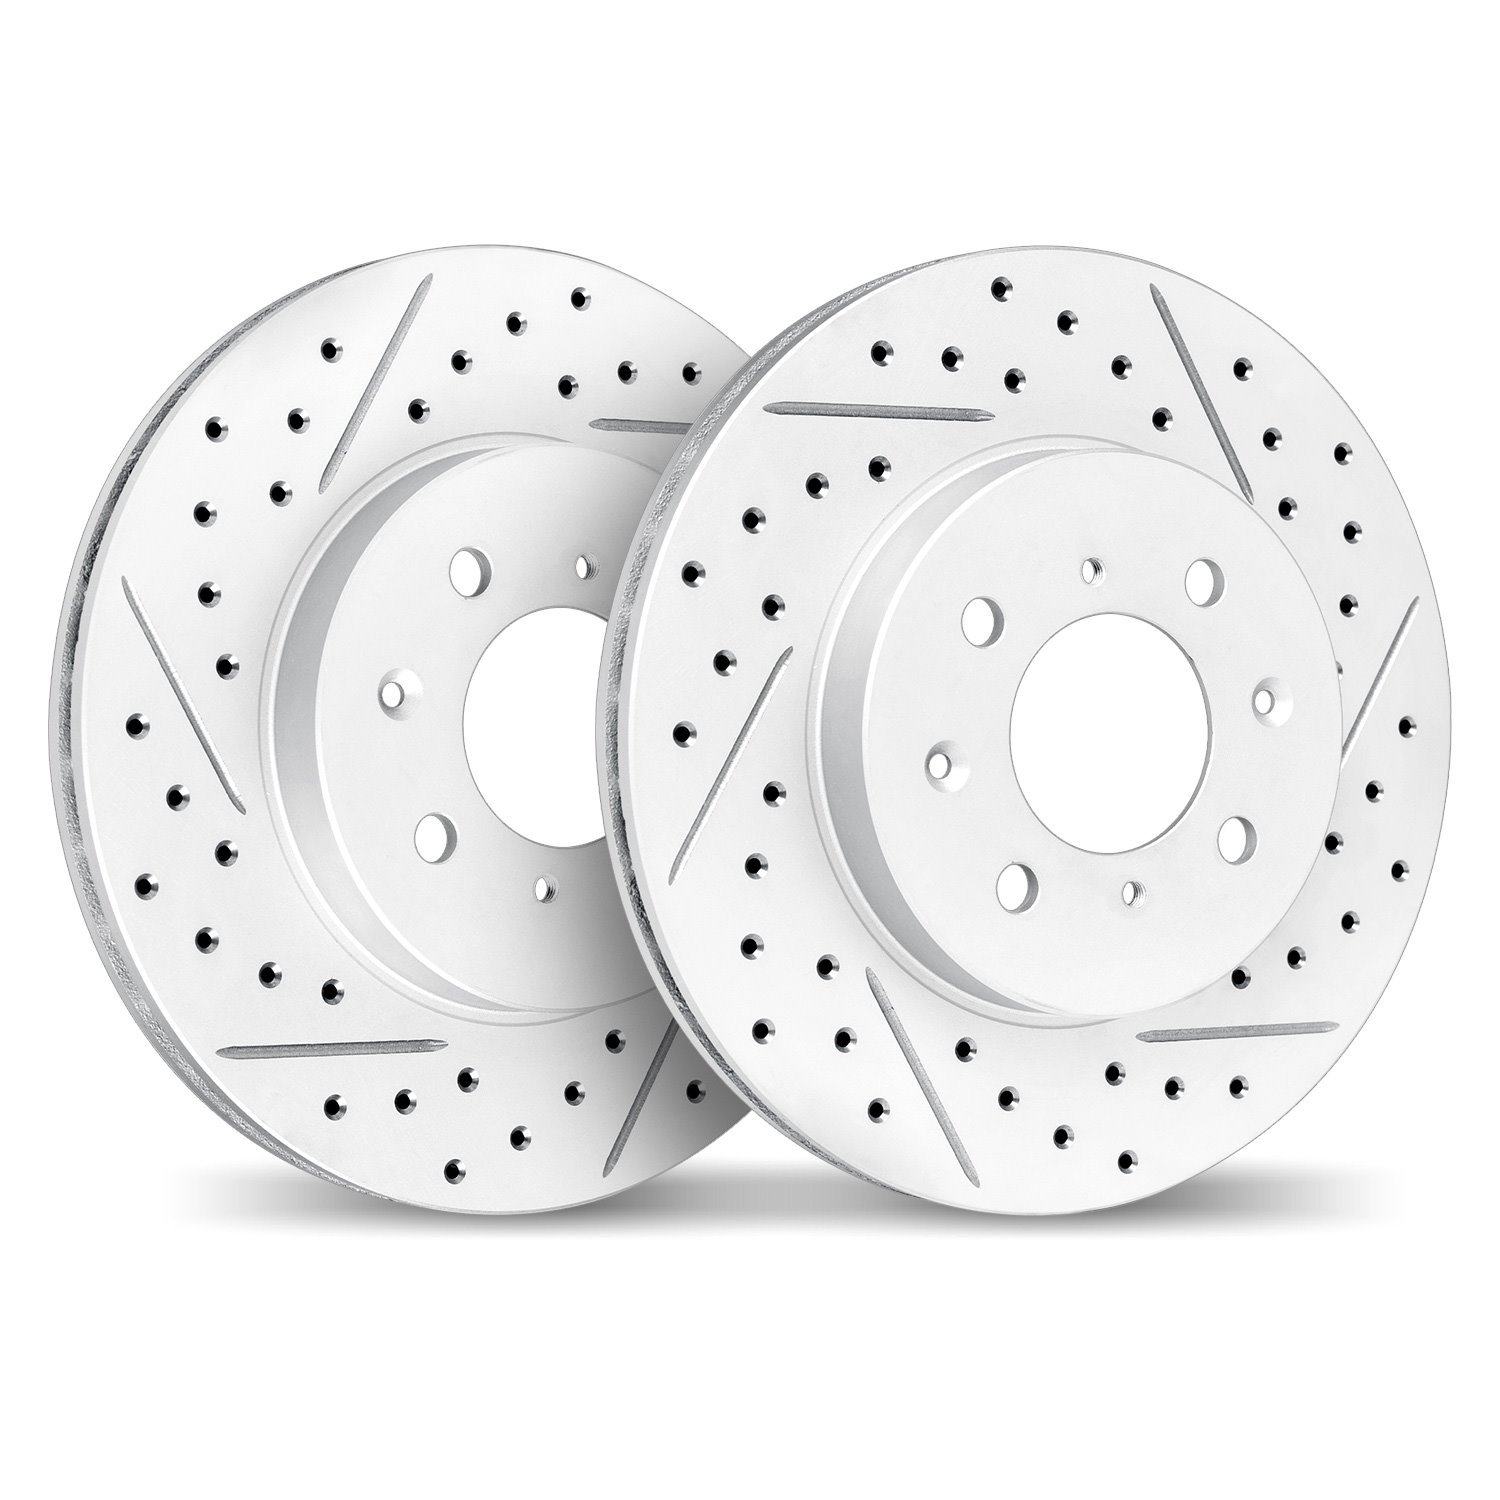 2002-76038 Geoperformance Drilled/Slotted Brake Rotors, 2012-2018 Lexus/Toyota/Scion, Position: Front